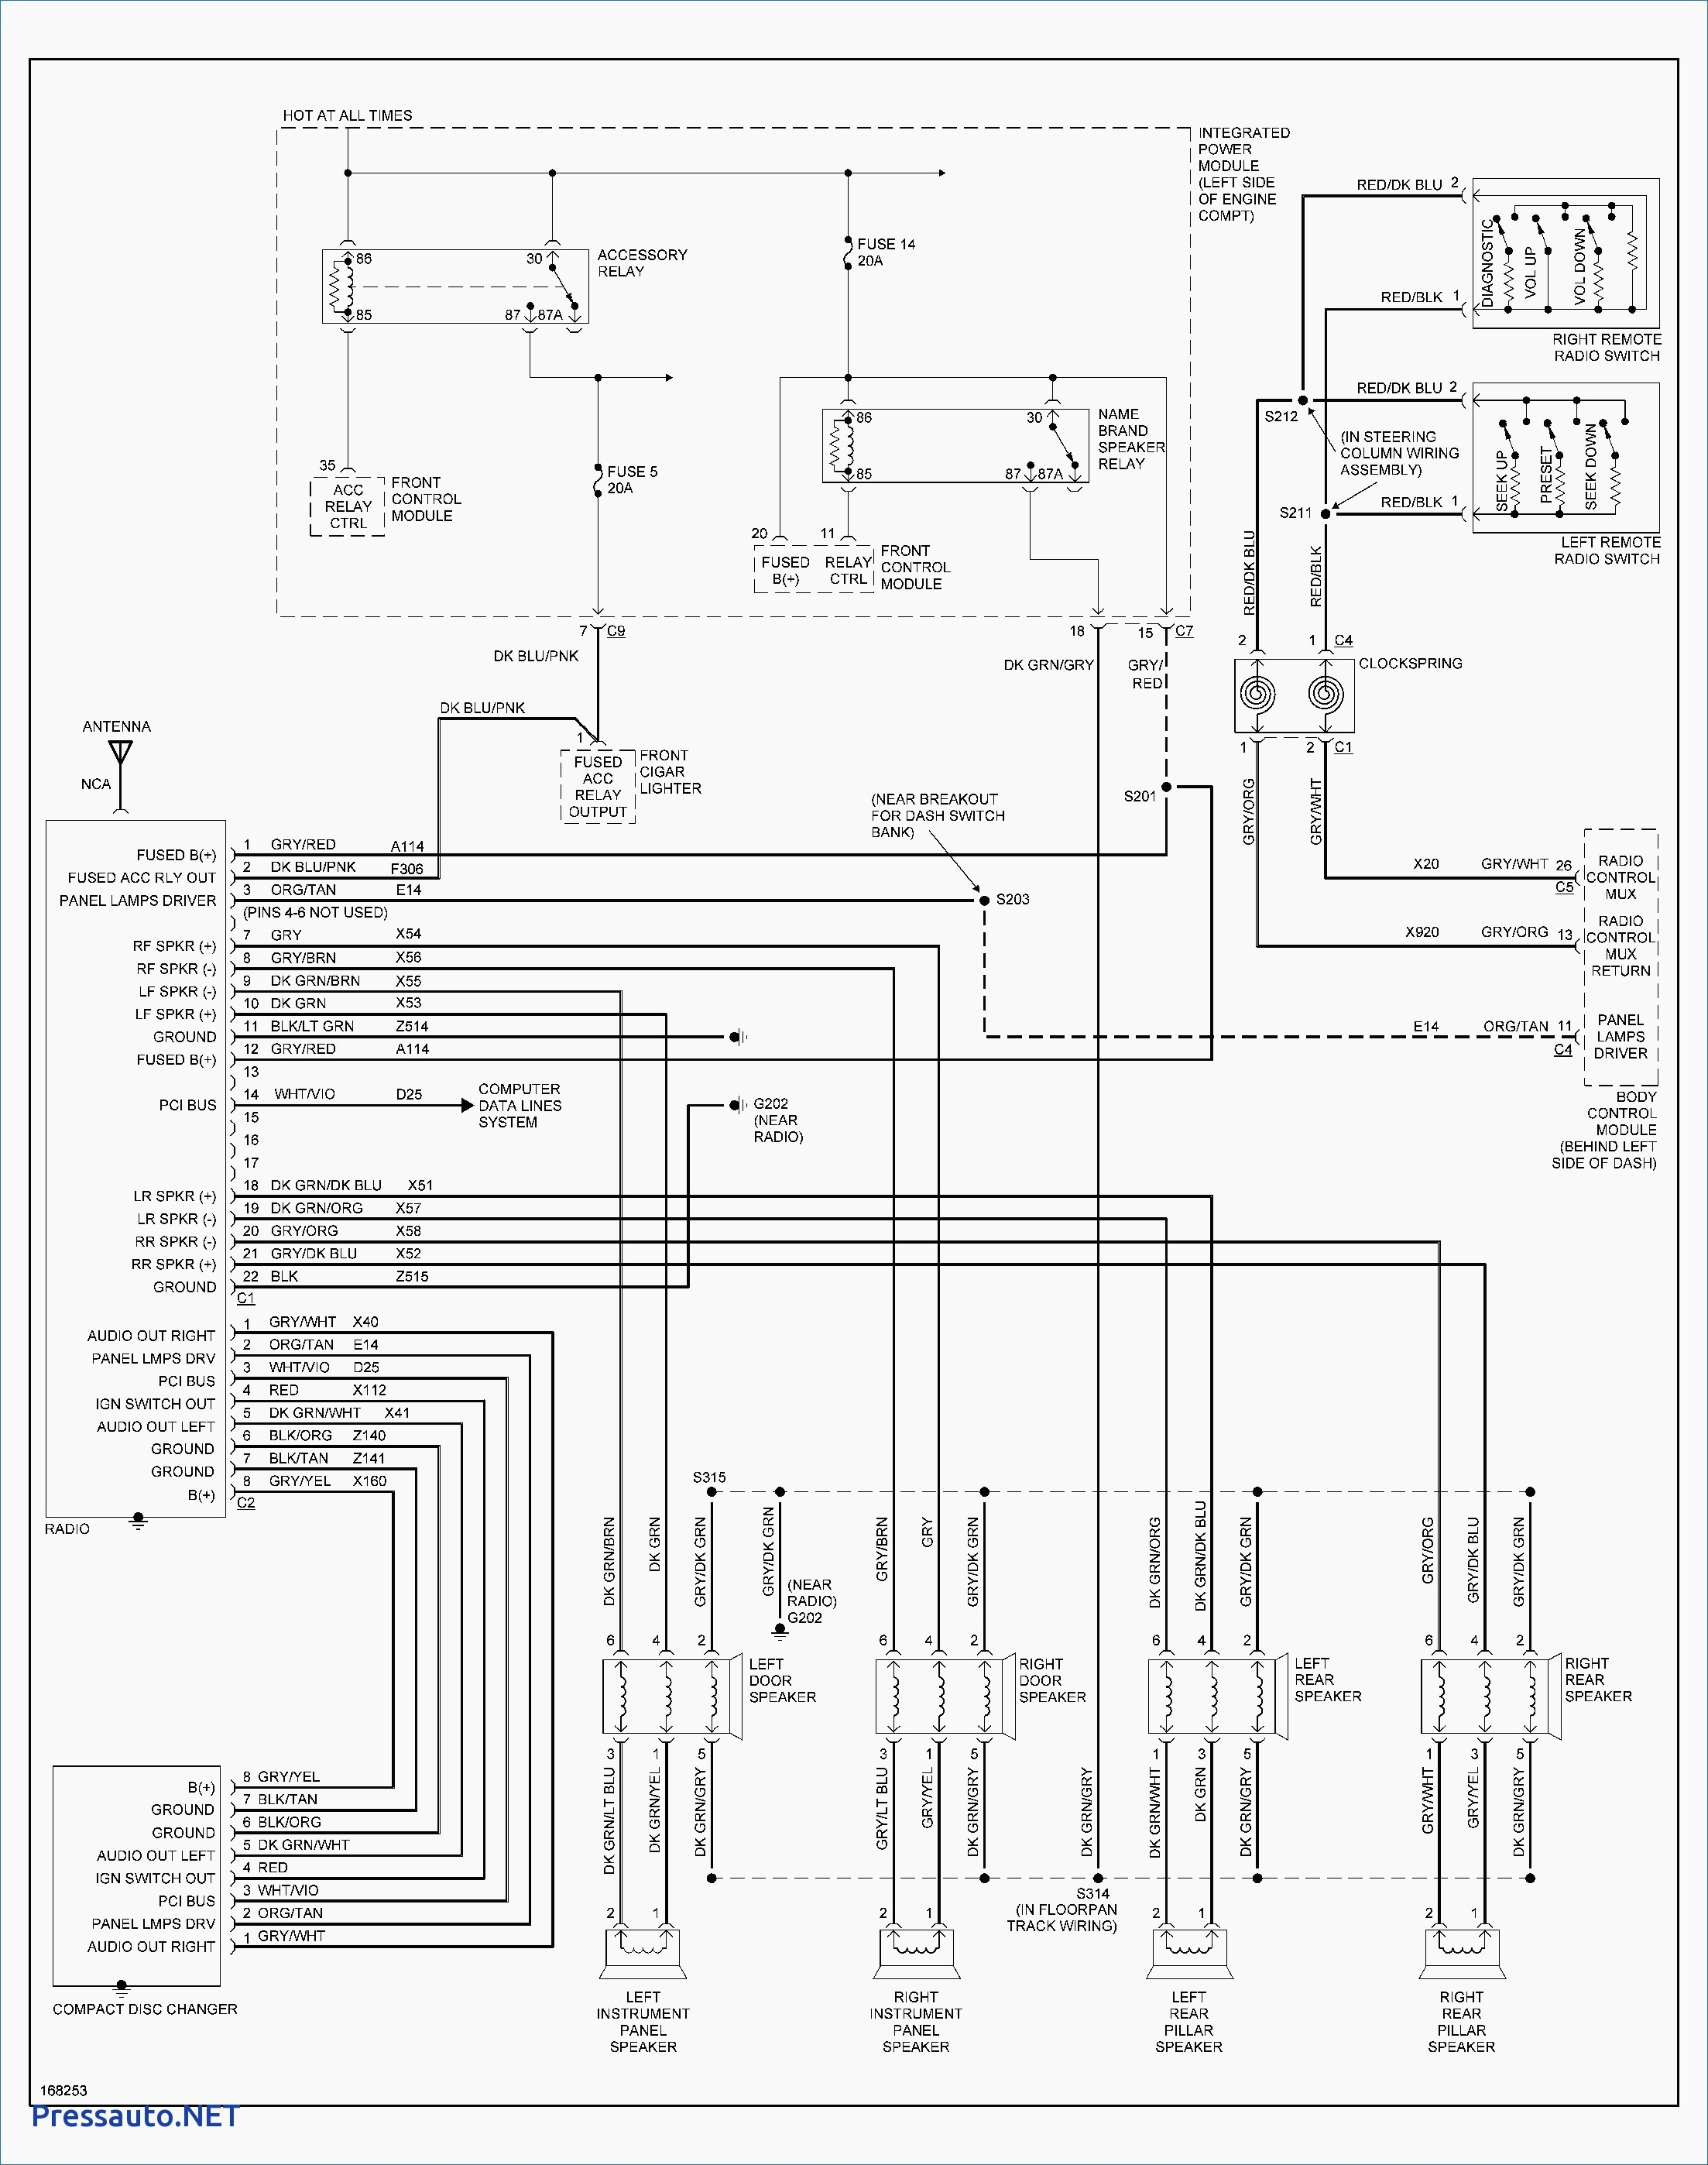 Wiring Diagram For 96 Dodge Ram Overdrive Switch Of 2002 1500 On - Dodge Ram 1500 Wiring Diagram Free